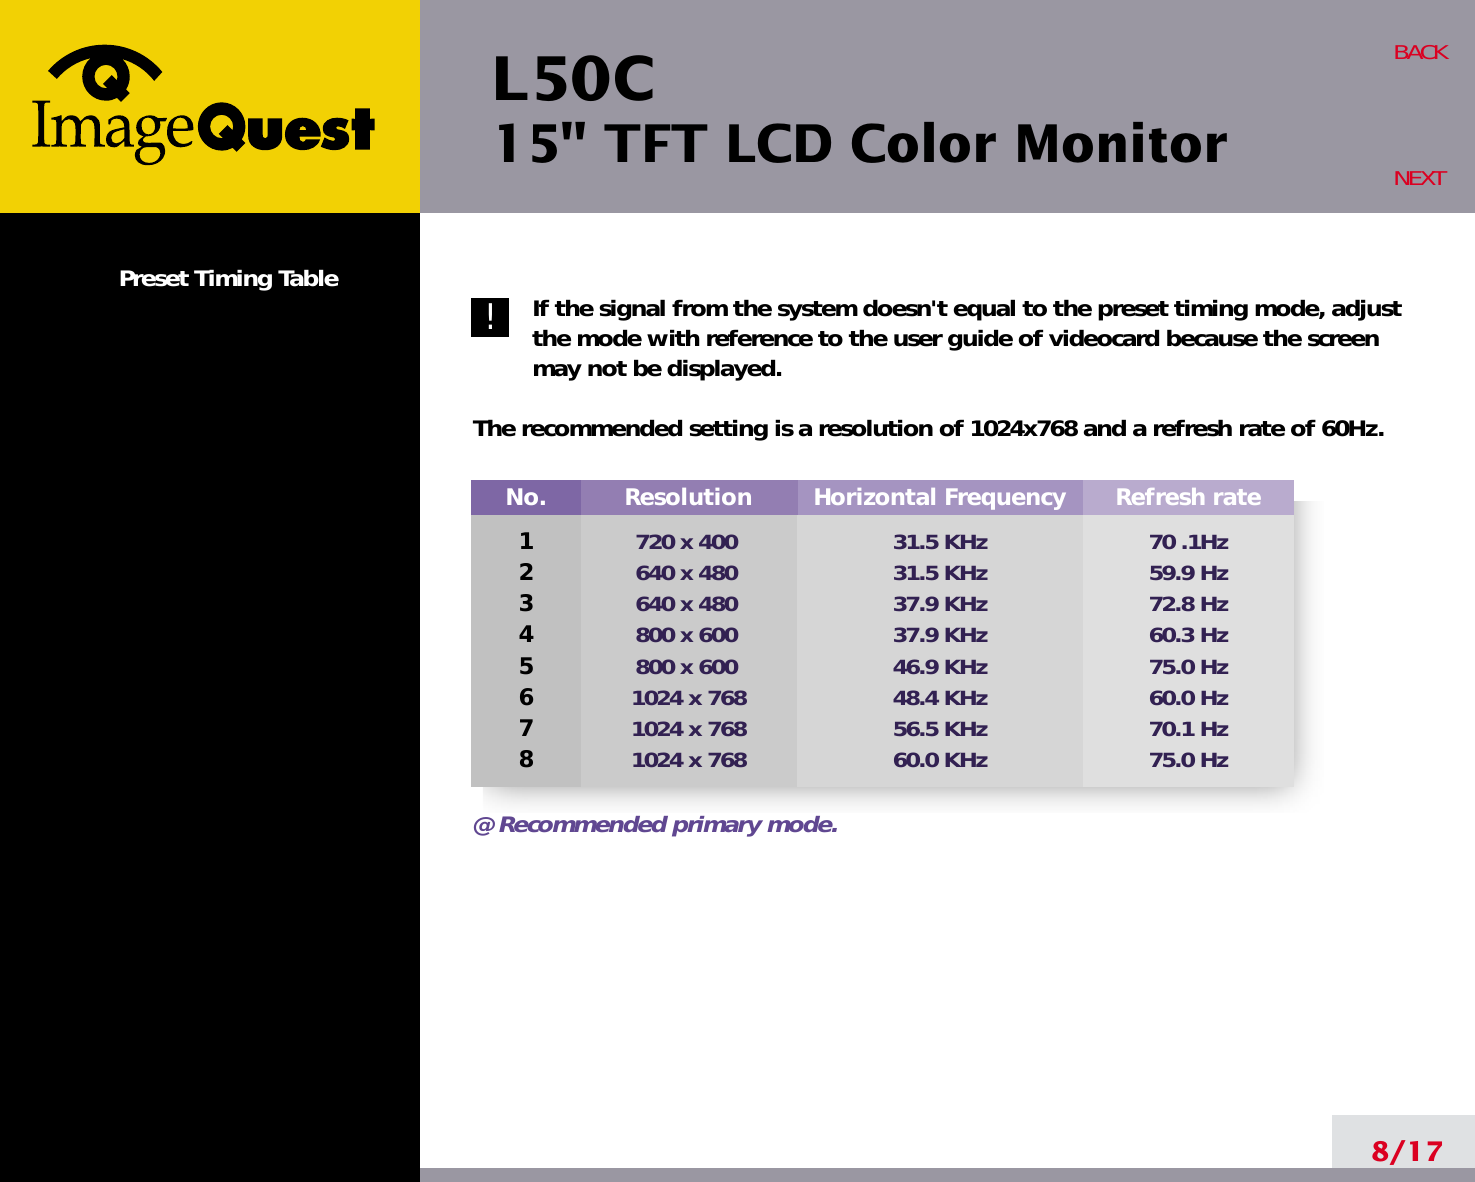 L50C15&quot; TFT LCD Color MonitorNo.12345678Resolution720 x 400640 x 480640 x 480800 x 600800 x 6001024 x 7681024 x 7681024 x 768Horizontal Frequency31.5 KHz31.5 KHz37.9 KHz37.9 KHz46.9 KHz48.4 KHz56.5 KHz60.0 KHzRefresh rate70 .1Hz59.9 Hz72.8 Hz60.3 Hz75.0 Hz60.0 Hz70.1 Hz75.0 Hz@ Recommended primary mode.Preset Timing Table If the signal from the system doesn&apos;t equal to the preset timing mode, adjustthe mode with reference to the user guide of videocard because the screenmay not be displayed.The recommended setting is a resolution of 1024x768 and a refresh rate of 60Hz.8/17BACKNEXT!